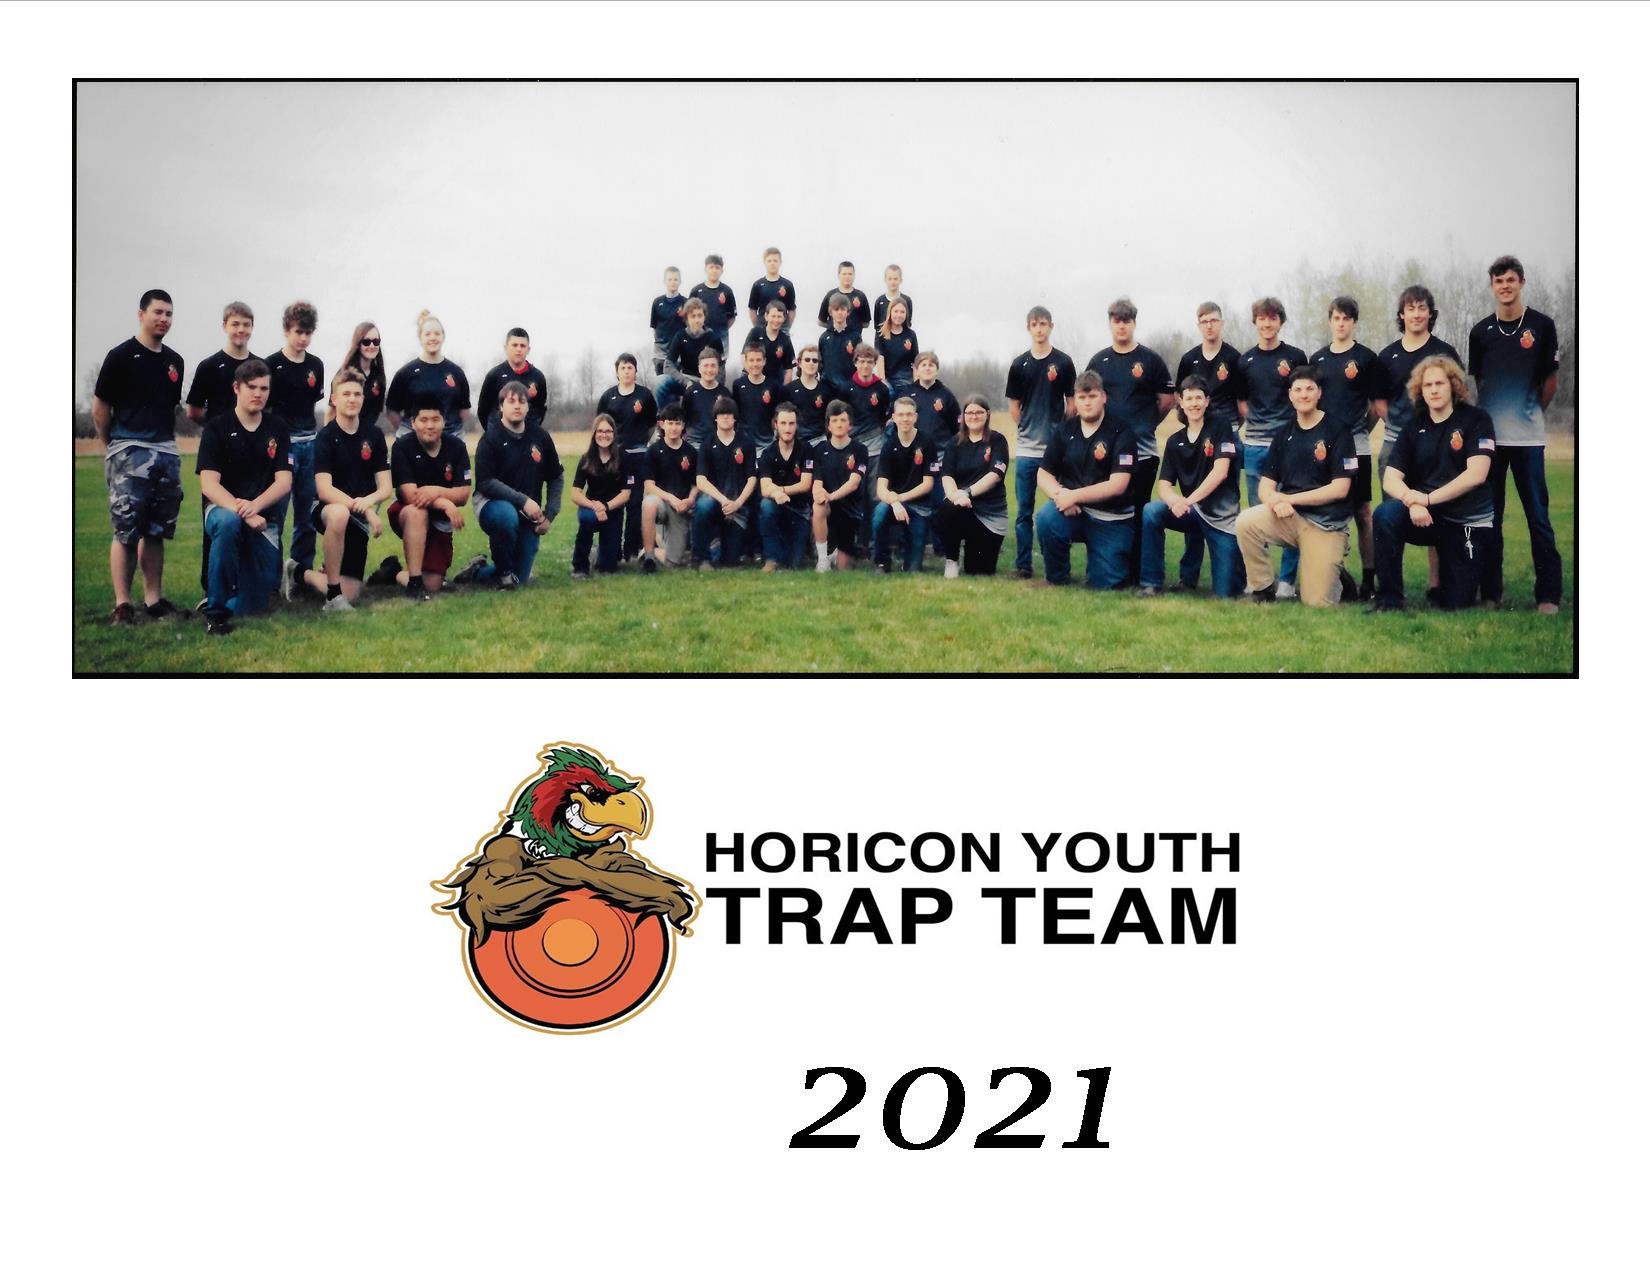 horicon youth trap team 2021